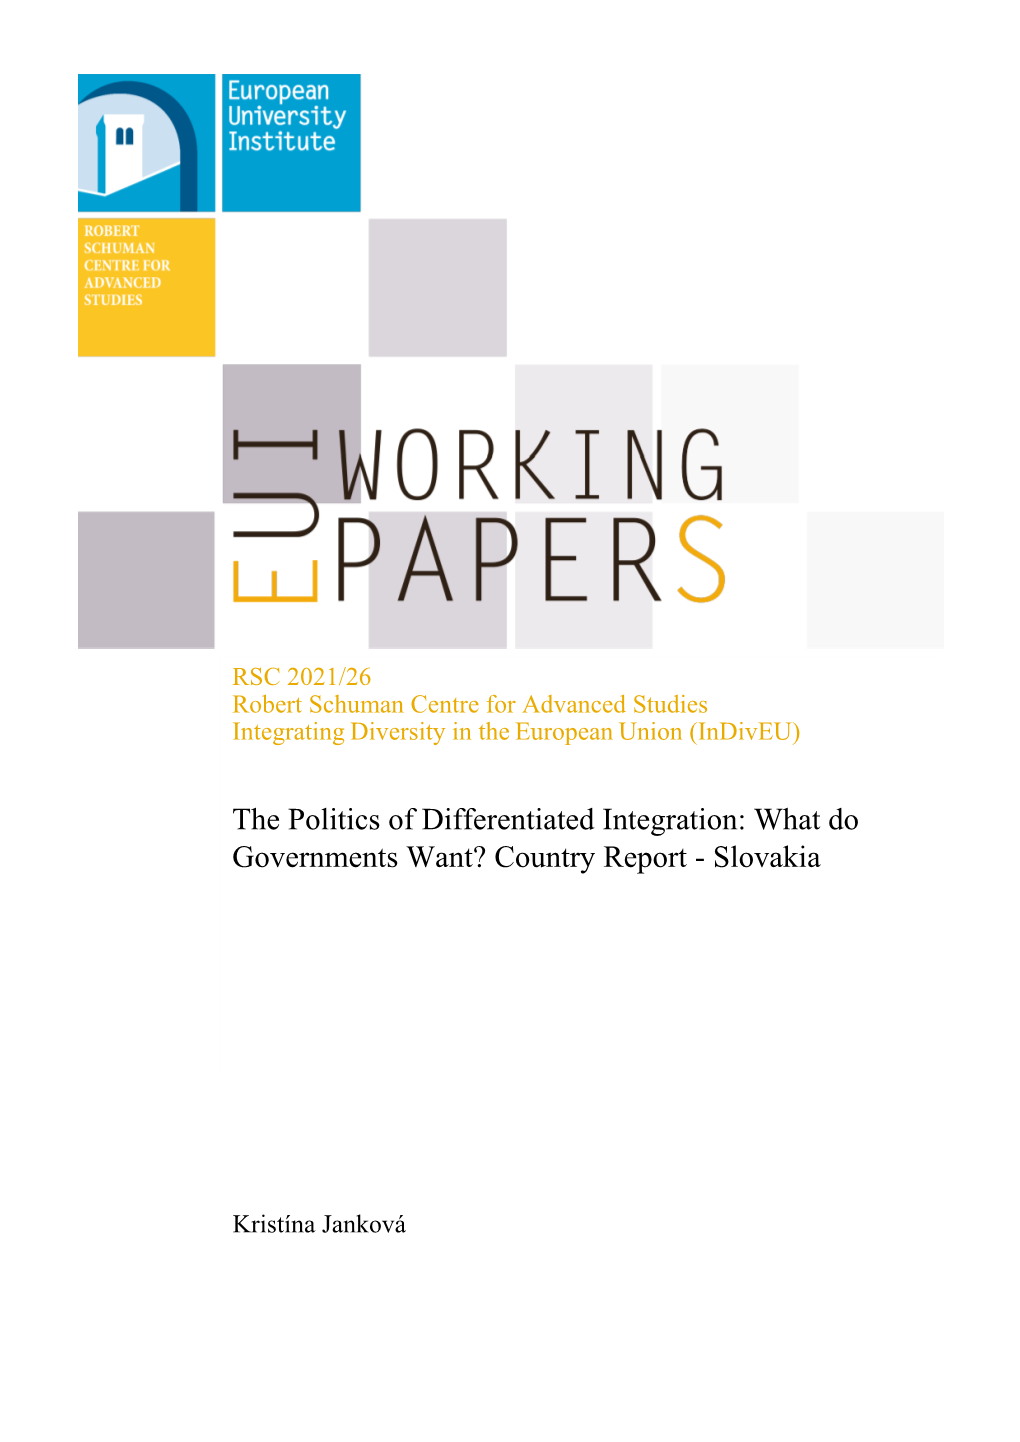 EUI RSCAS Working Paper 2021/26The Politics of Differentiated